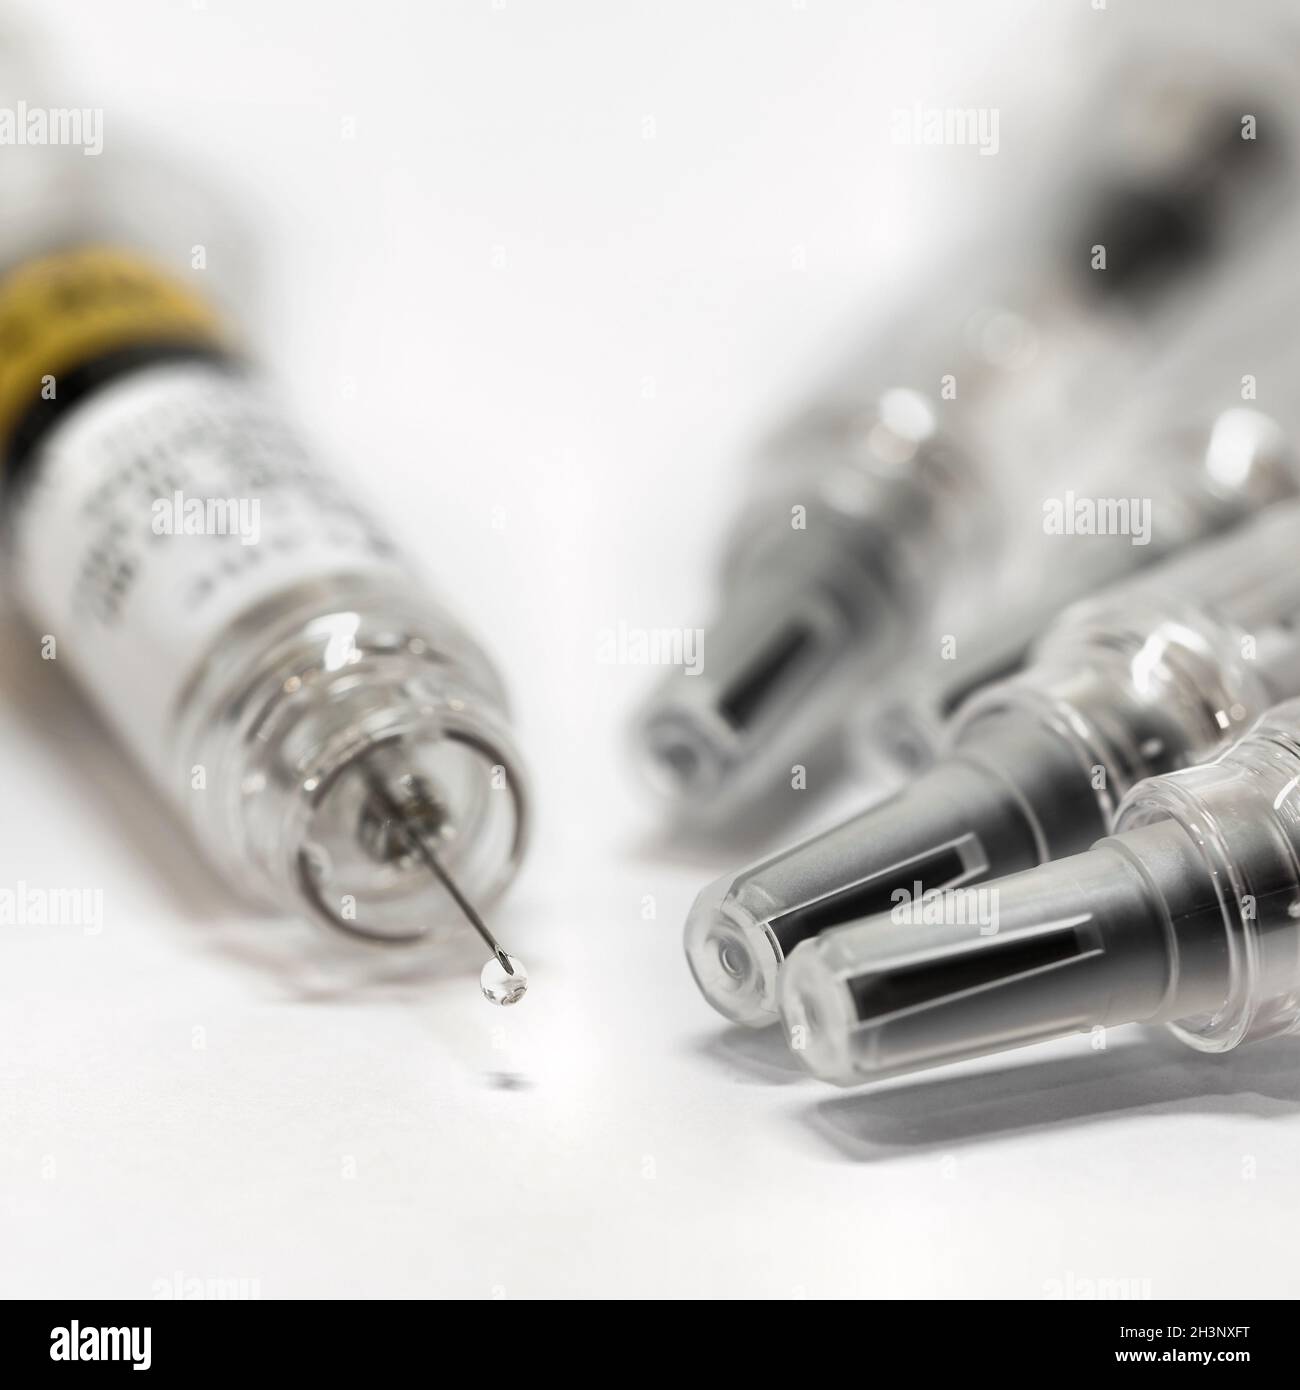 Syringe with vaccine to combat coronavirus on a table. A drop hangs from the tip of the needle. Stock Photo